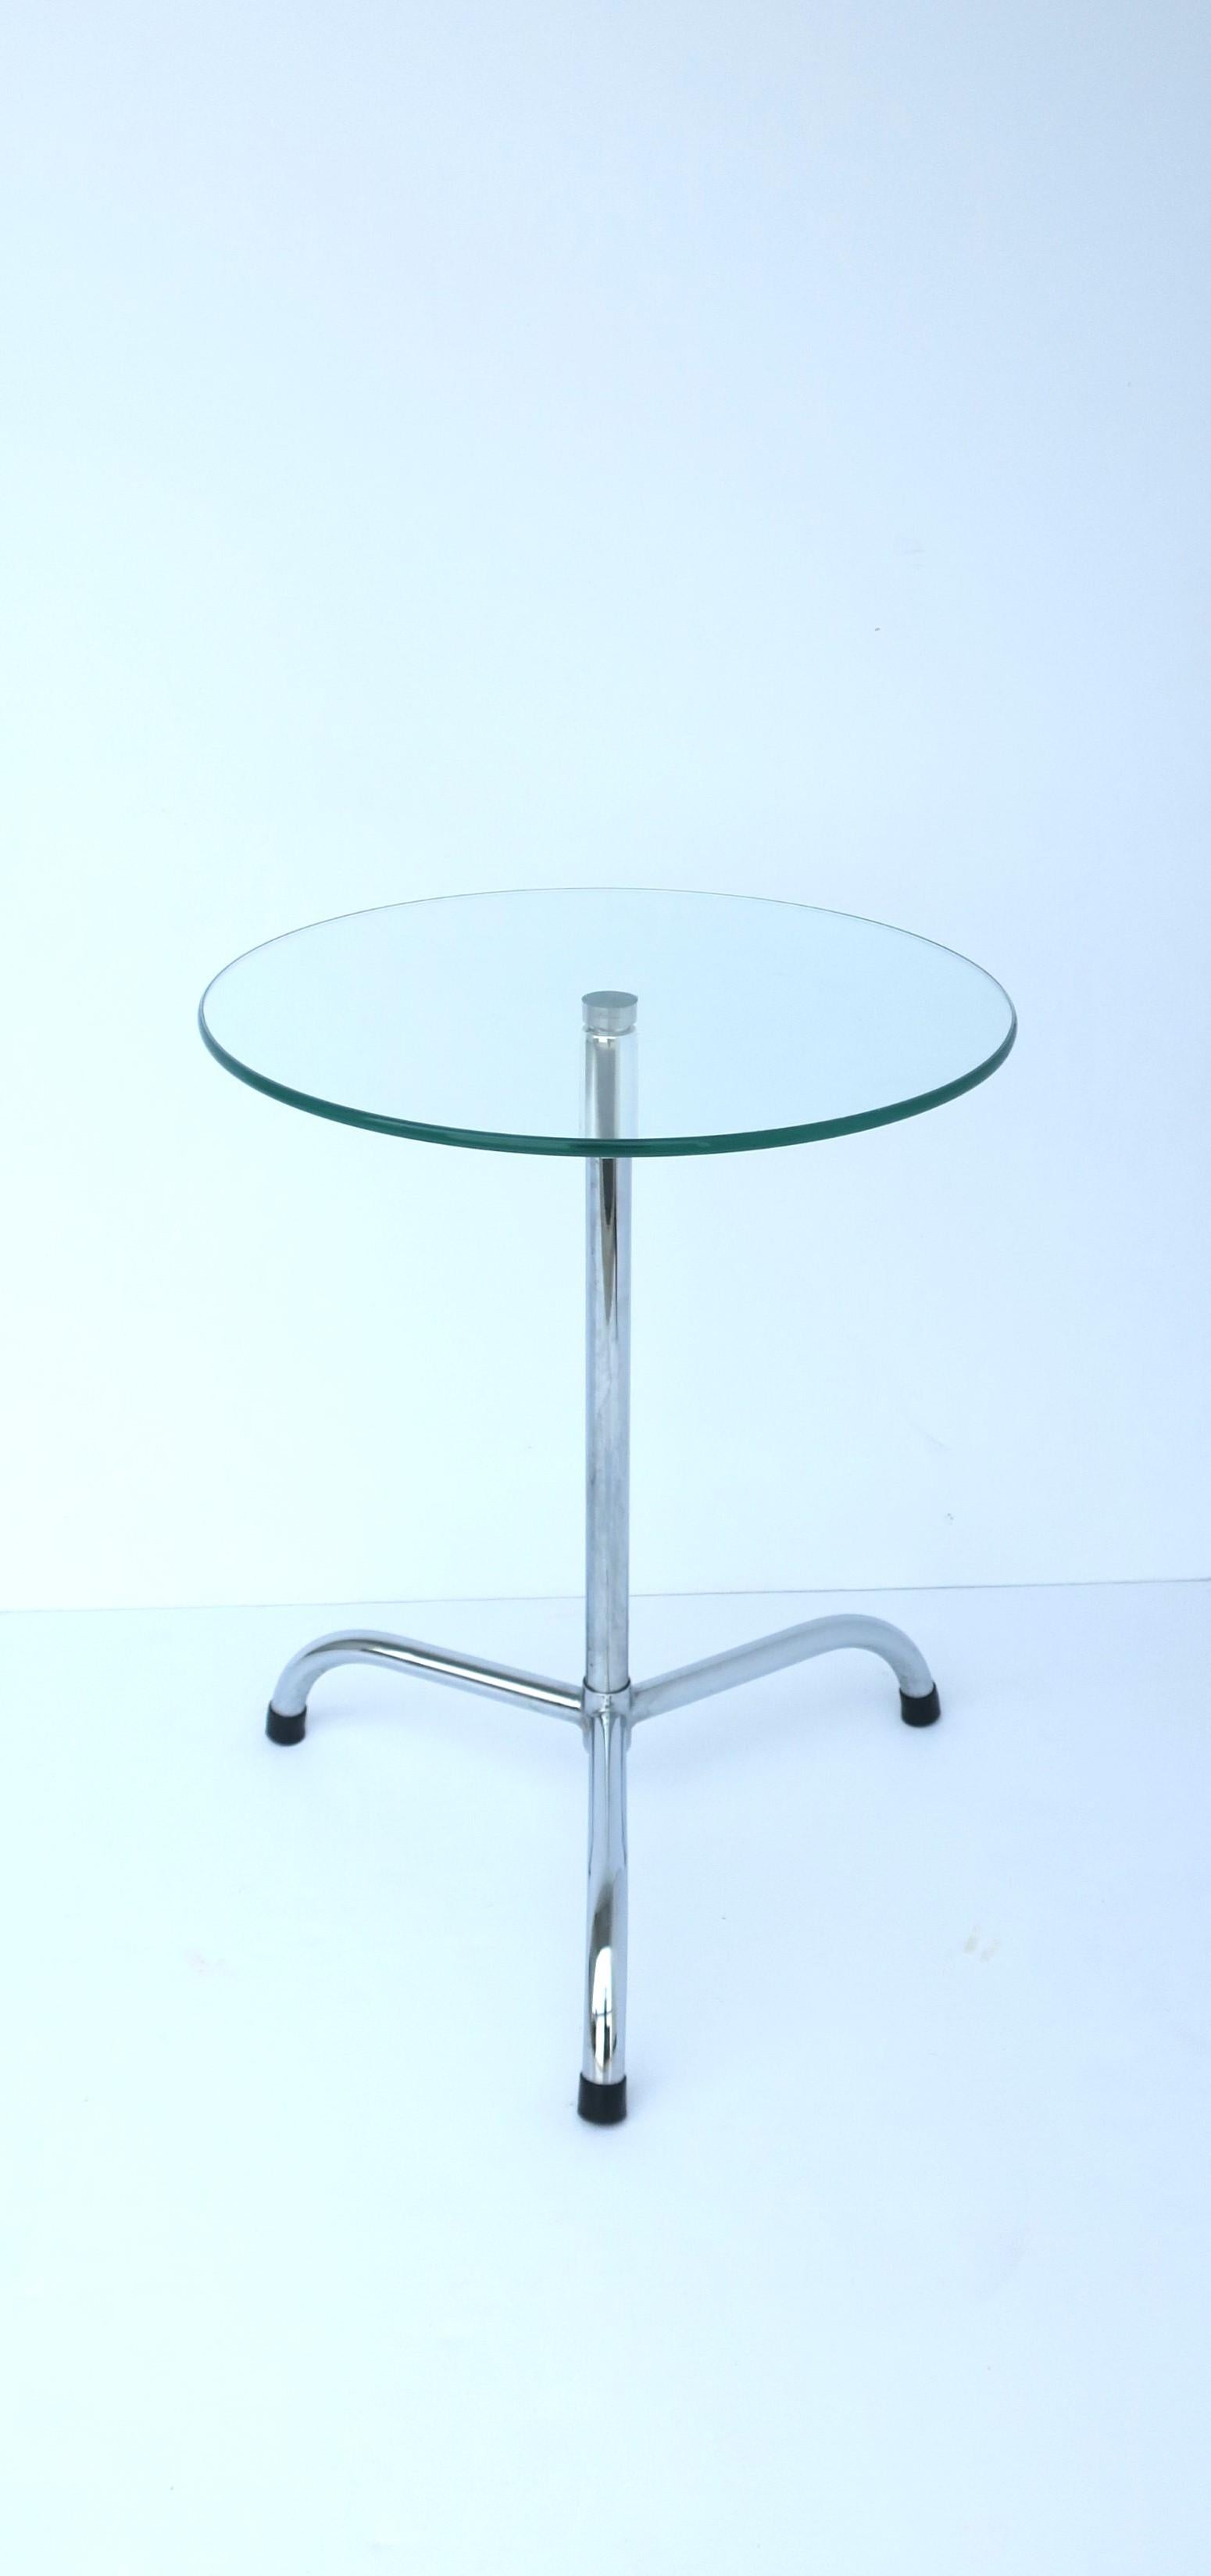 A chrome and glass side drink table in the Modern style, circa late-20th century, 1970s. Table has a round glass top with smooth flush surface and a chrome tri-pod base. A convenient table for dinks, cocktails, nuts, etc. Dimensions: 14.88